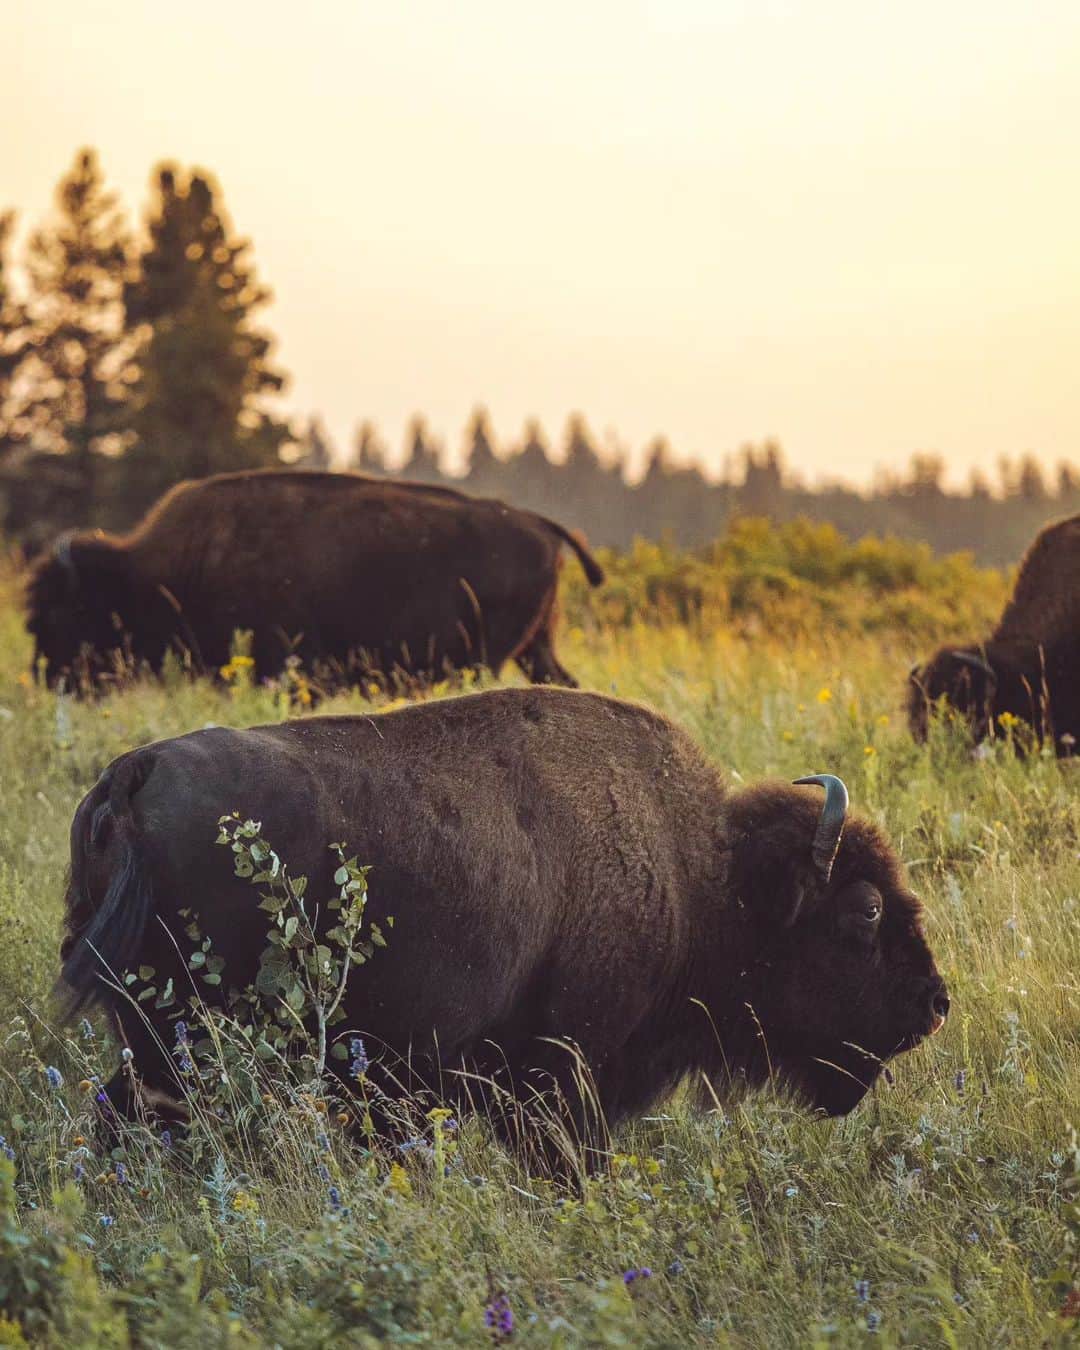 Explore Canadaのインスタグラム：「Buckle in as we take you through a story of loss, perseverance, and hope. 🍿  Hundreds of years ago bison roamed the prairie grasslands as far as the eye could see. Due to overhunting, the bison population became all but depleted. A detrimental outcome to not only bison and other wildlife, but for the grasslands and ecosystem of the region.  Bison reintroduction was possible because of conservation methods put to work in the early 1900’s. After an initial herd was struck down with disease and did not survive, 10 bison from Elk Island National Park were brought to the Lake Audy Bison Enclosure to call it home in the 1940s.  The enclosure is 500 hectares in size (2.5 football fields fit in one hectare to give you a sense of size) and has openings throughout the fence to allow other wildlife such as deer and elk inside and out in an attempt to not disrupt their natural movements.  Although bison were re-introduced in Riding Mountain National Park as a display herd, today they are valued as much more. Their life cycle is intimately intertwined with the health of the prairie and its other inhabitants. Bison forage on specific grasses, forbs and trees; they create wallows and trails throughout the area; they add nutrients to the soil and they help propagate seeds, therefore contributing to the cycle of life. The importance of this native species is also recognized through the role they played in the development and life of the Indigenous people.   The bison you see today are all descendants from the herd introduced more than 80 years ago. 🥹   To learn more about visiting the enclosure please visit @parks.canada’s website for more details.   📷: @alexander.albani  📍: Clear Lake, Wasagaming, @parks.canada, @TravelManitoba   #ExploreCanada  #ExploreMB  Image description: 3 large bison wandering through tall grass. The setting sun provides a warm and hazy glow.」